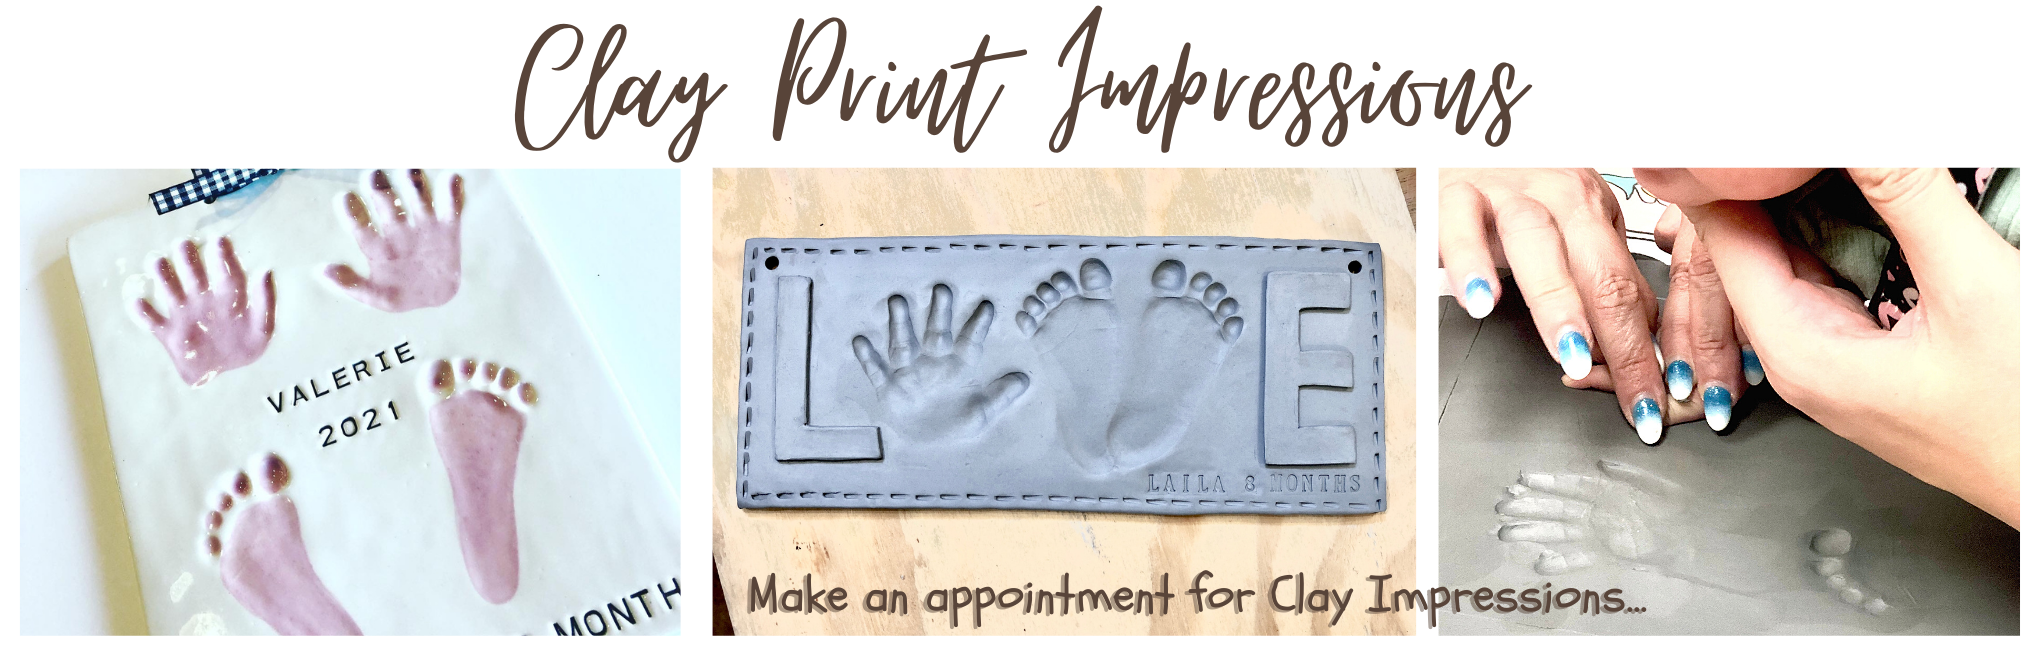 Clay prints banner